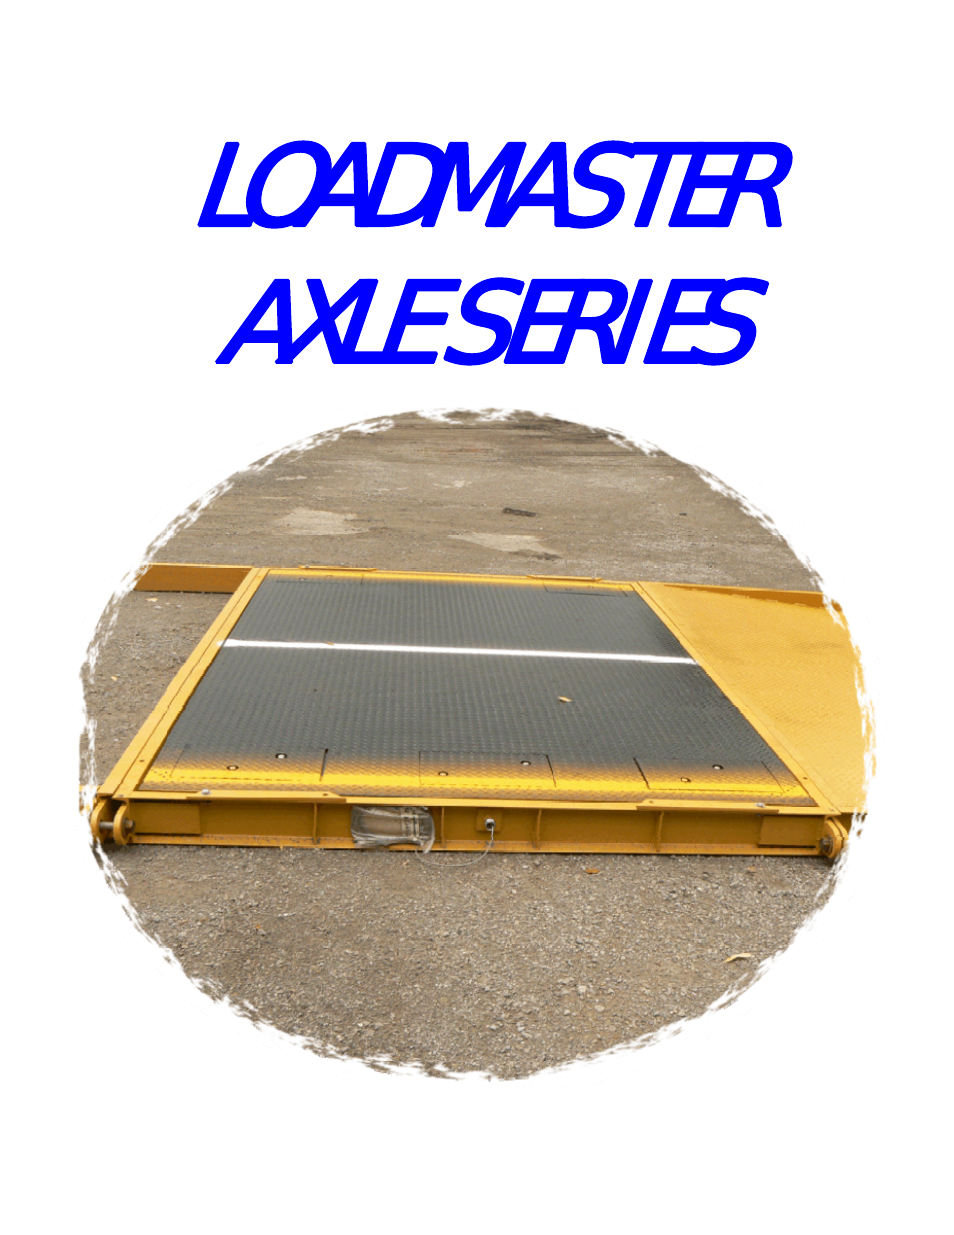 Portable Axle Scale 7'x10' w/ramps